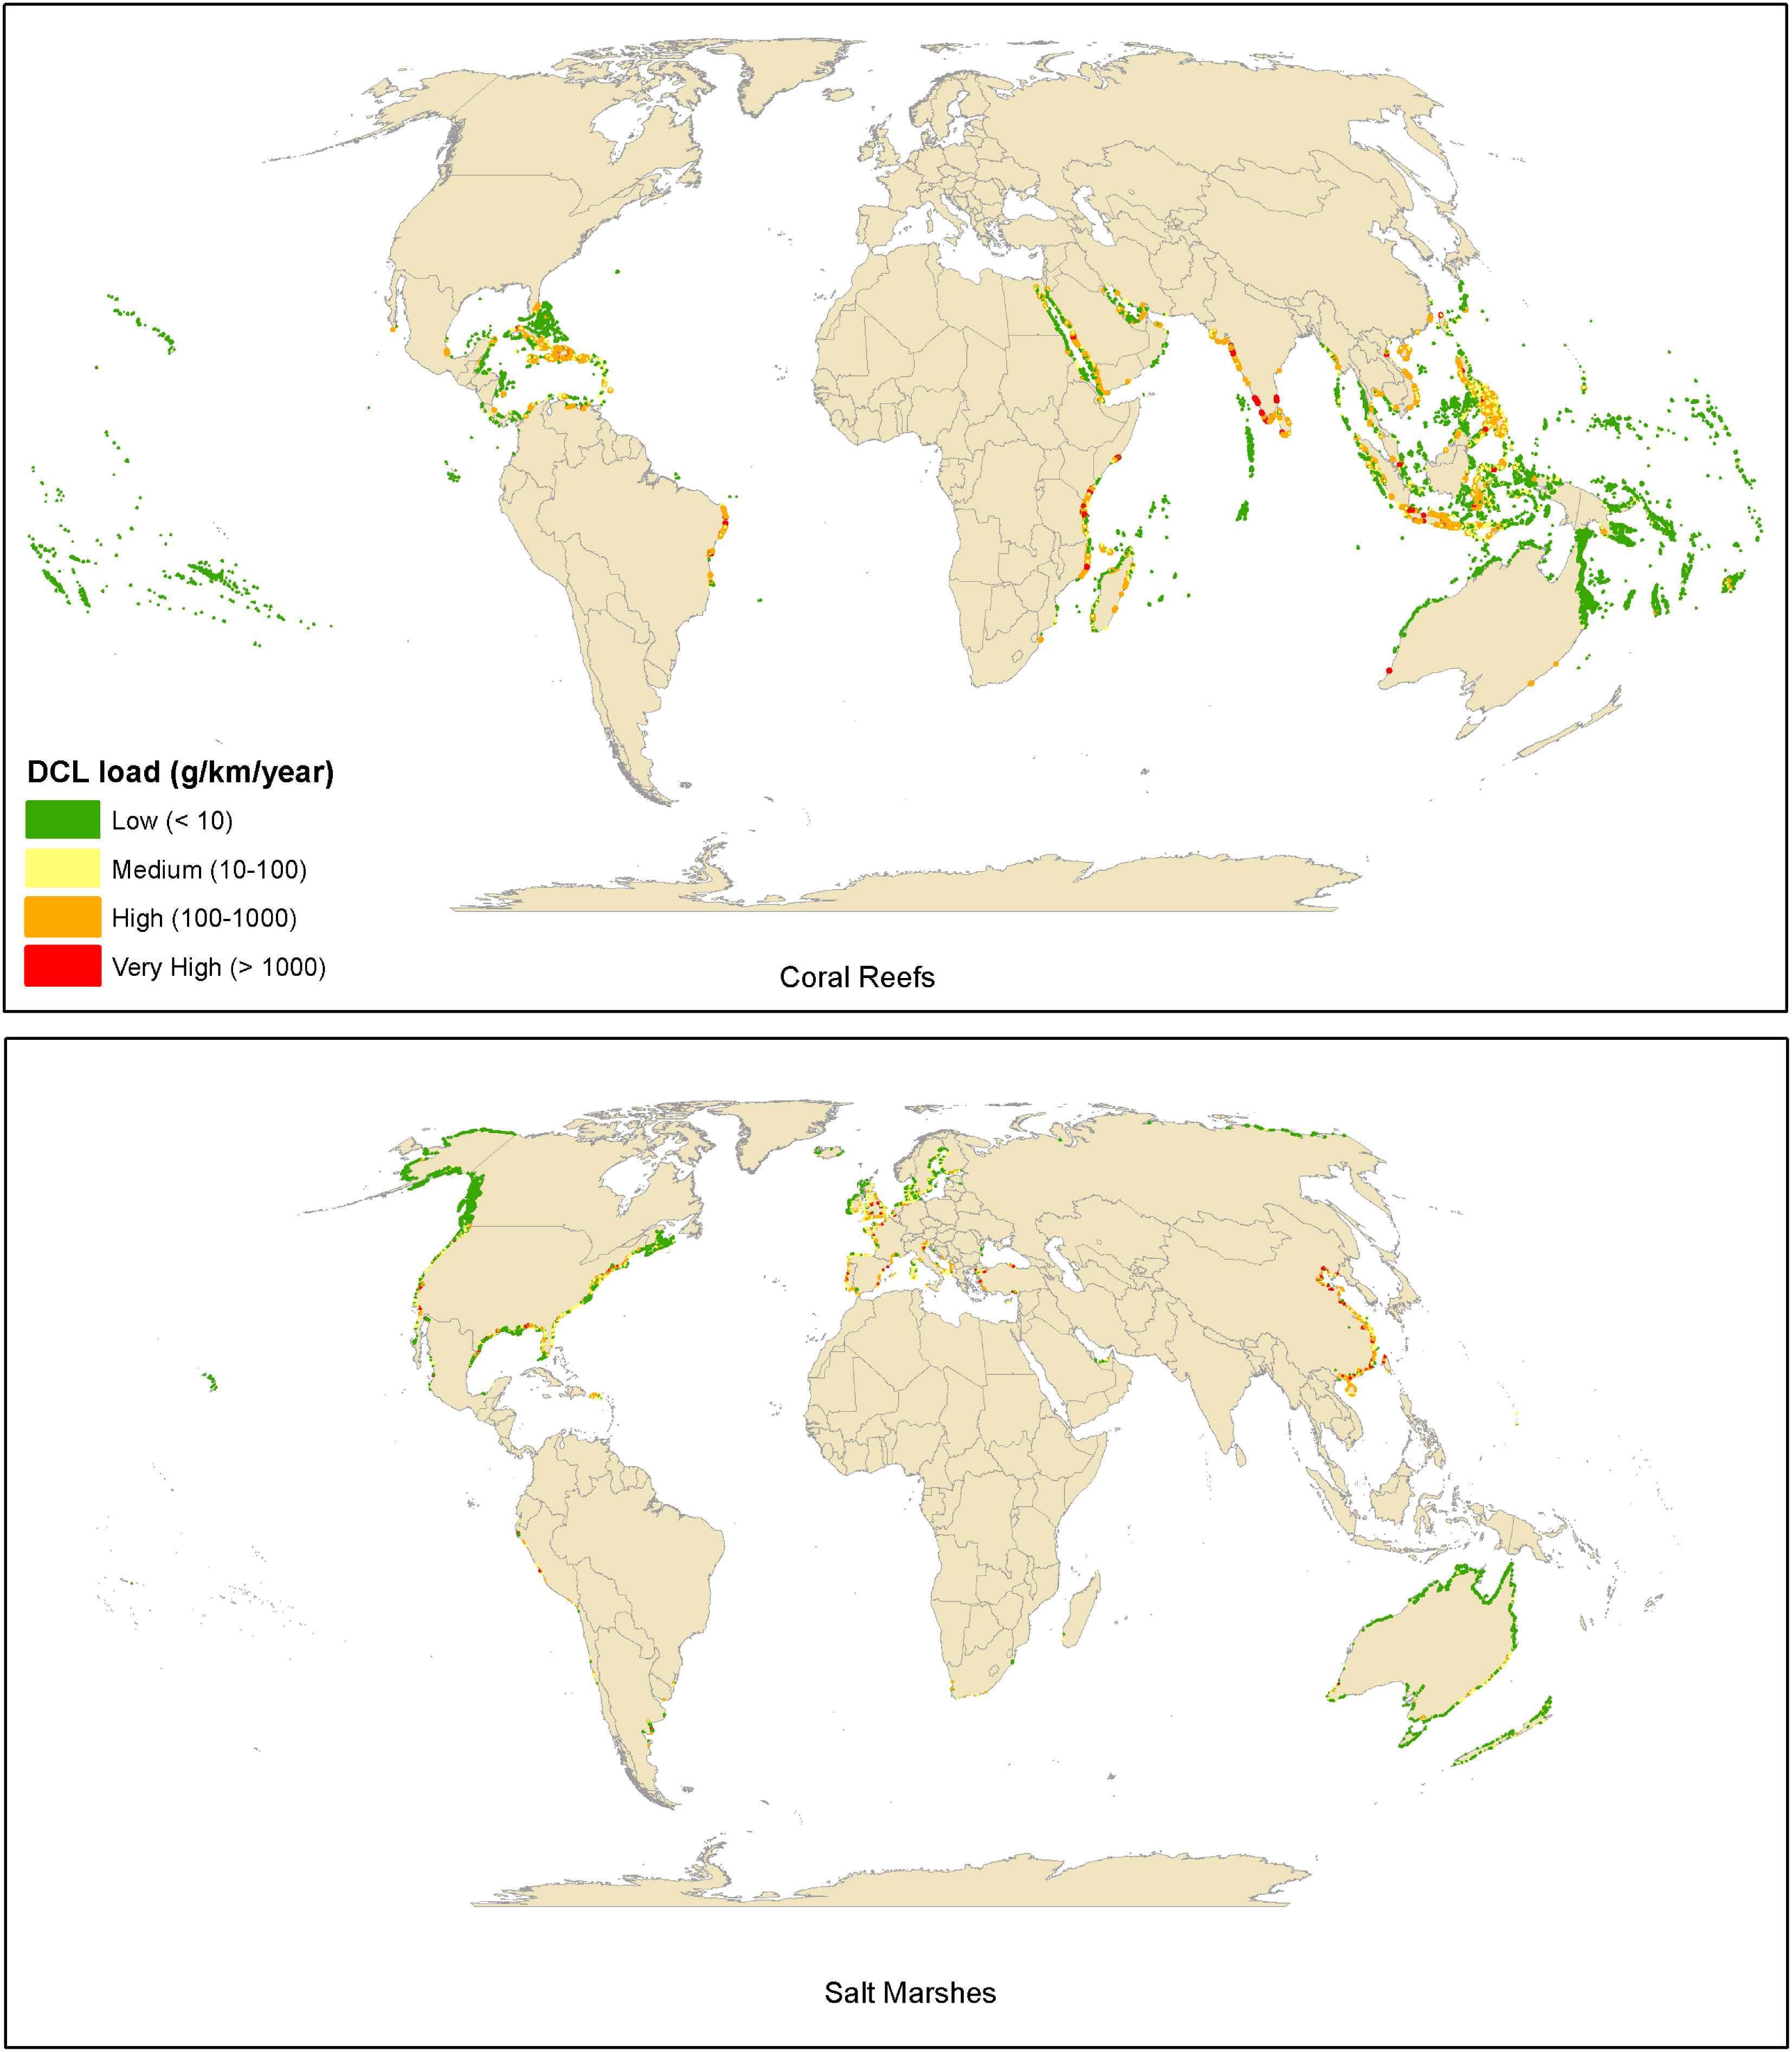 Two global maps showing the prevalence of wastewater pollution along coastlines